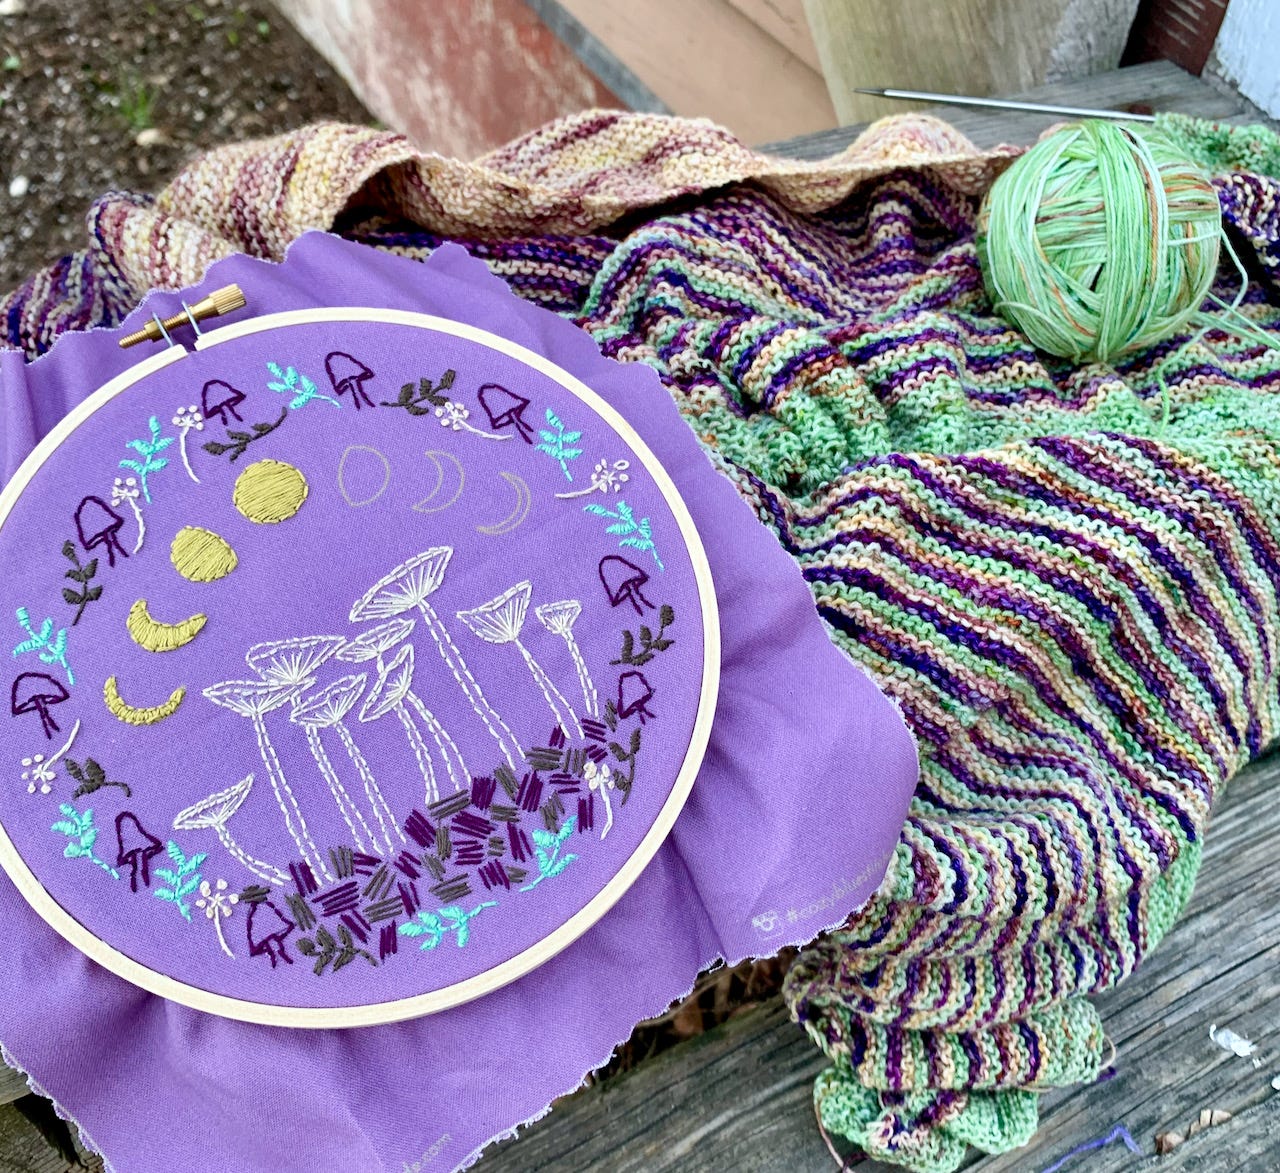 An embroider hoop  of mushrooms and moons on top of a striped shawl